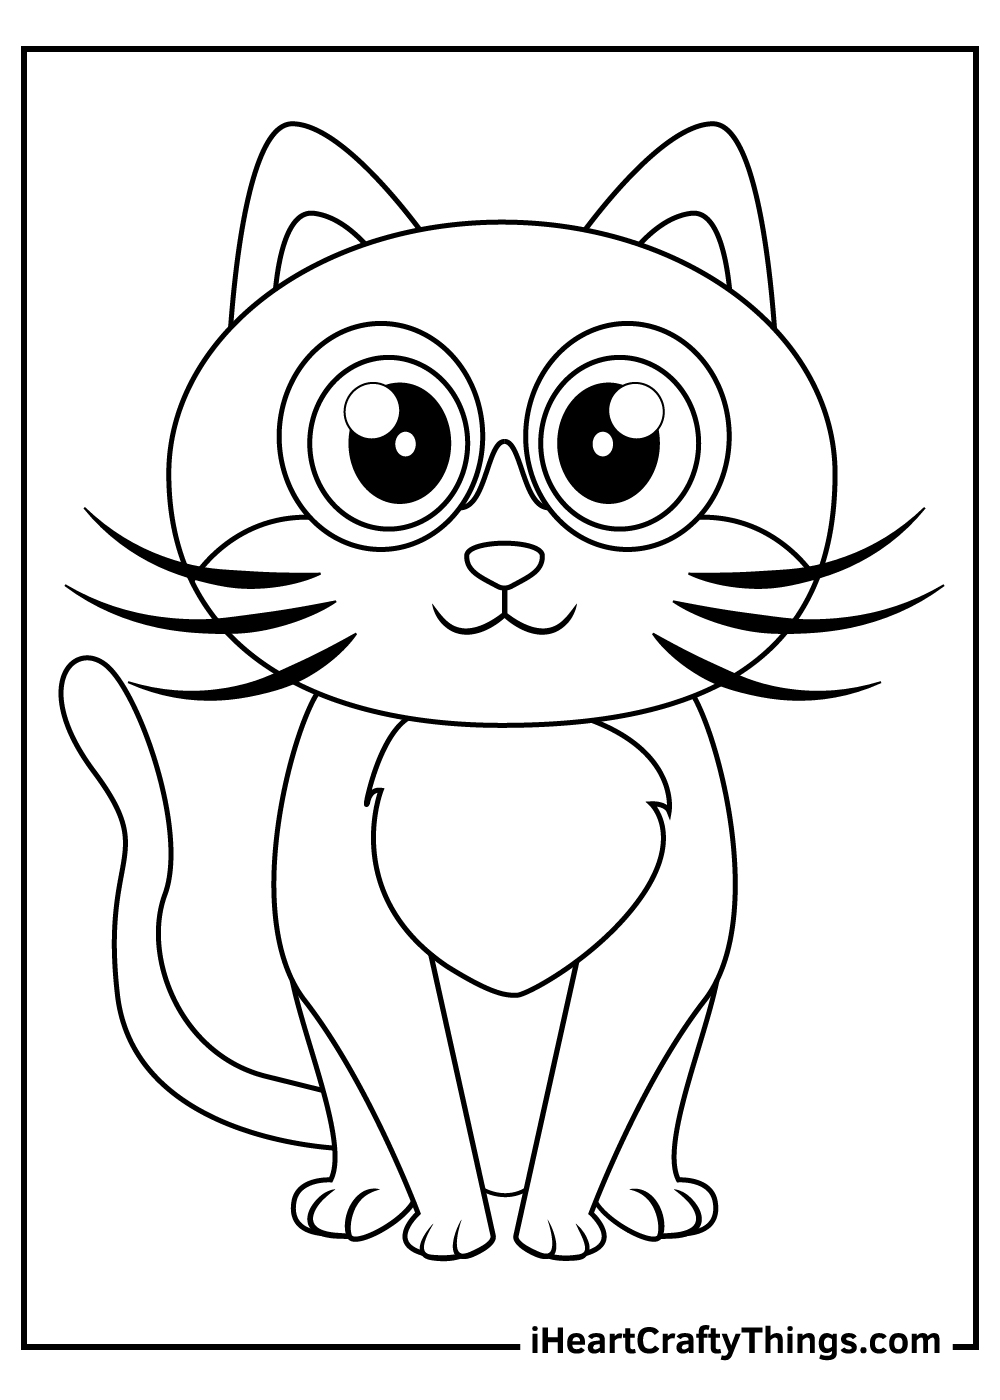 Cute Kitten Coloring Pages Updated 2021